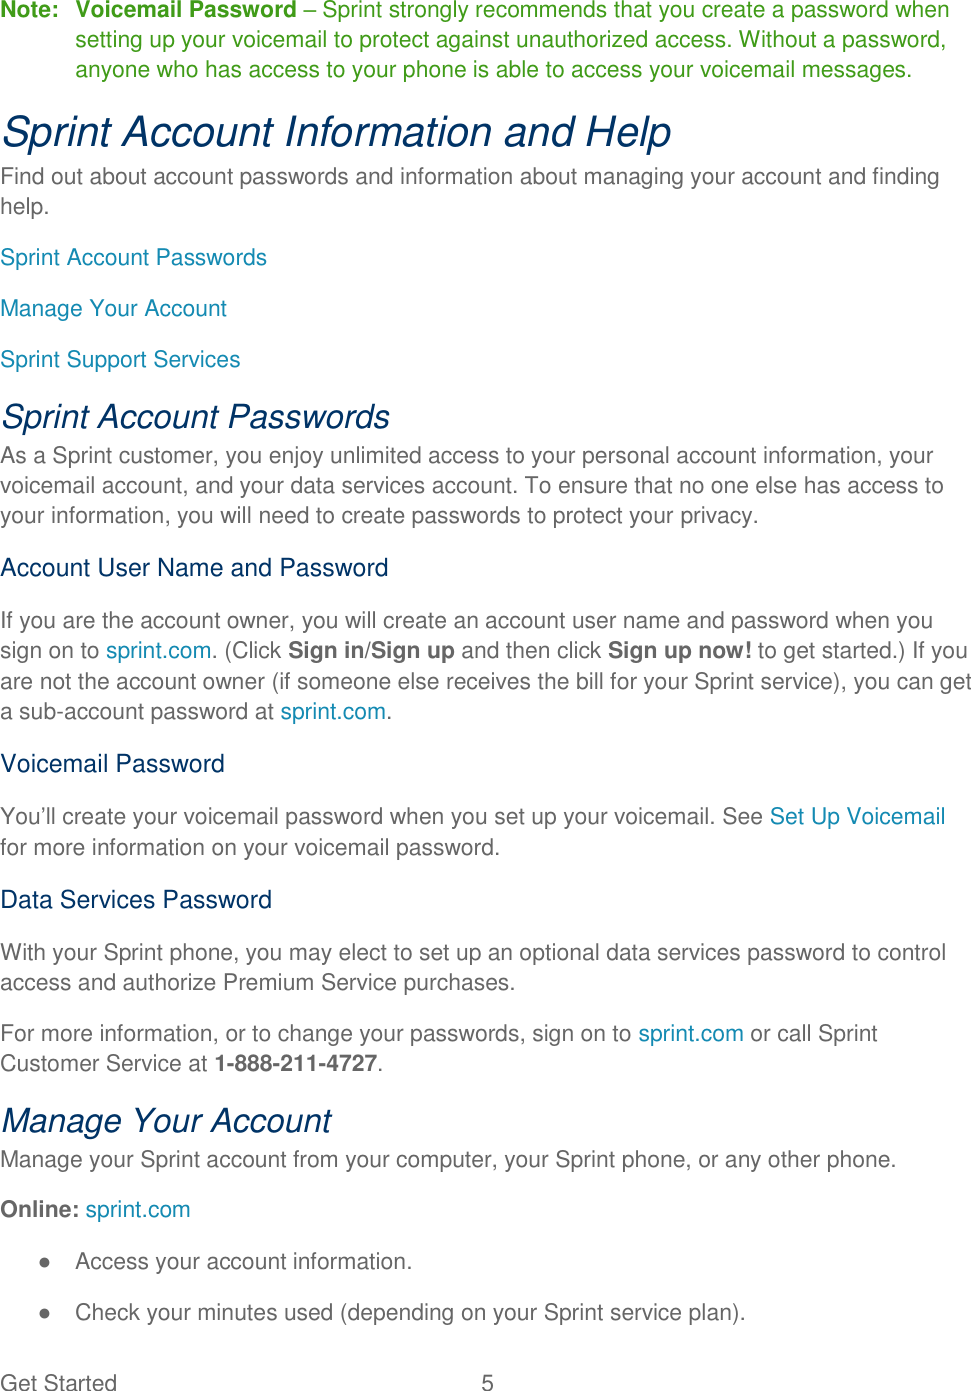 Get Started  5 Note:  Voicemail Password – Sprint strongly recommends that you create a password when setting up your voicemail to protect against unauthorized access. Without a password, anyone who has access to your phone is able to access your voicemail messages. Sprint Account Information and Help Find out about account passwords and information about managing your account and finding help. Sprint Account Passwords Manage Your Account Sprint Support Services Sprint Account Passwords As a Sprint customer, you enjoy unlimited access to your personal account information, your voicemail account, and your data services account. To ensure that no one else has access to your information, you will need to create passwords to protect your privacy. Account User Name and Password If you are the account owner, you will create an account user name and password when you sign on to sprint.com. (Click Sign in/Sign up and then click Sign up now! to get started.) If you are not the account owner (if someone else receives the bill for your Sprint service), you can get a sub-account password at sprint.com. Voicemail Password You‘ll create your voicemail password when you set up your voicemail. See Set Up Voicemail for more information on your voicemail password. Data Services Password With your Sprint phone, you may elect to set up an optional data services password to control access and authorize Premium Service purchases. For more information, or to change your passwords, sign on to sprint.com or call Sprint Customer Service at 1-888-211-4727. Manage Your Account Manage your Sprint account from your computer, your Sprint phone, or any other phone. Online: sprint.com ●  Access your account information. ●  Check your minutes used (depending on your Sprint service plan). 